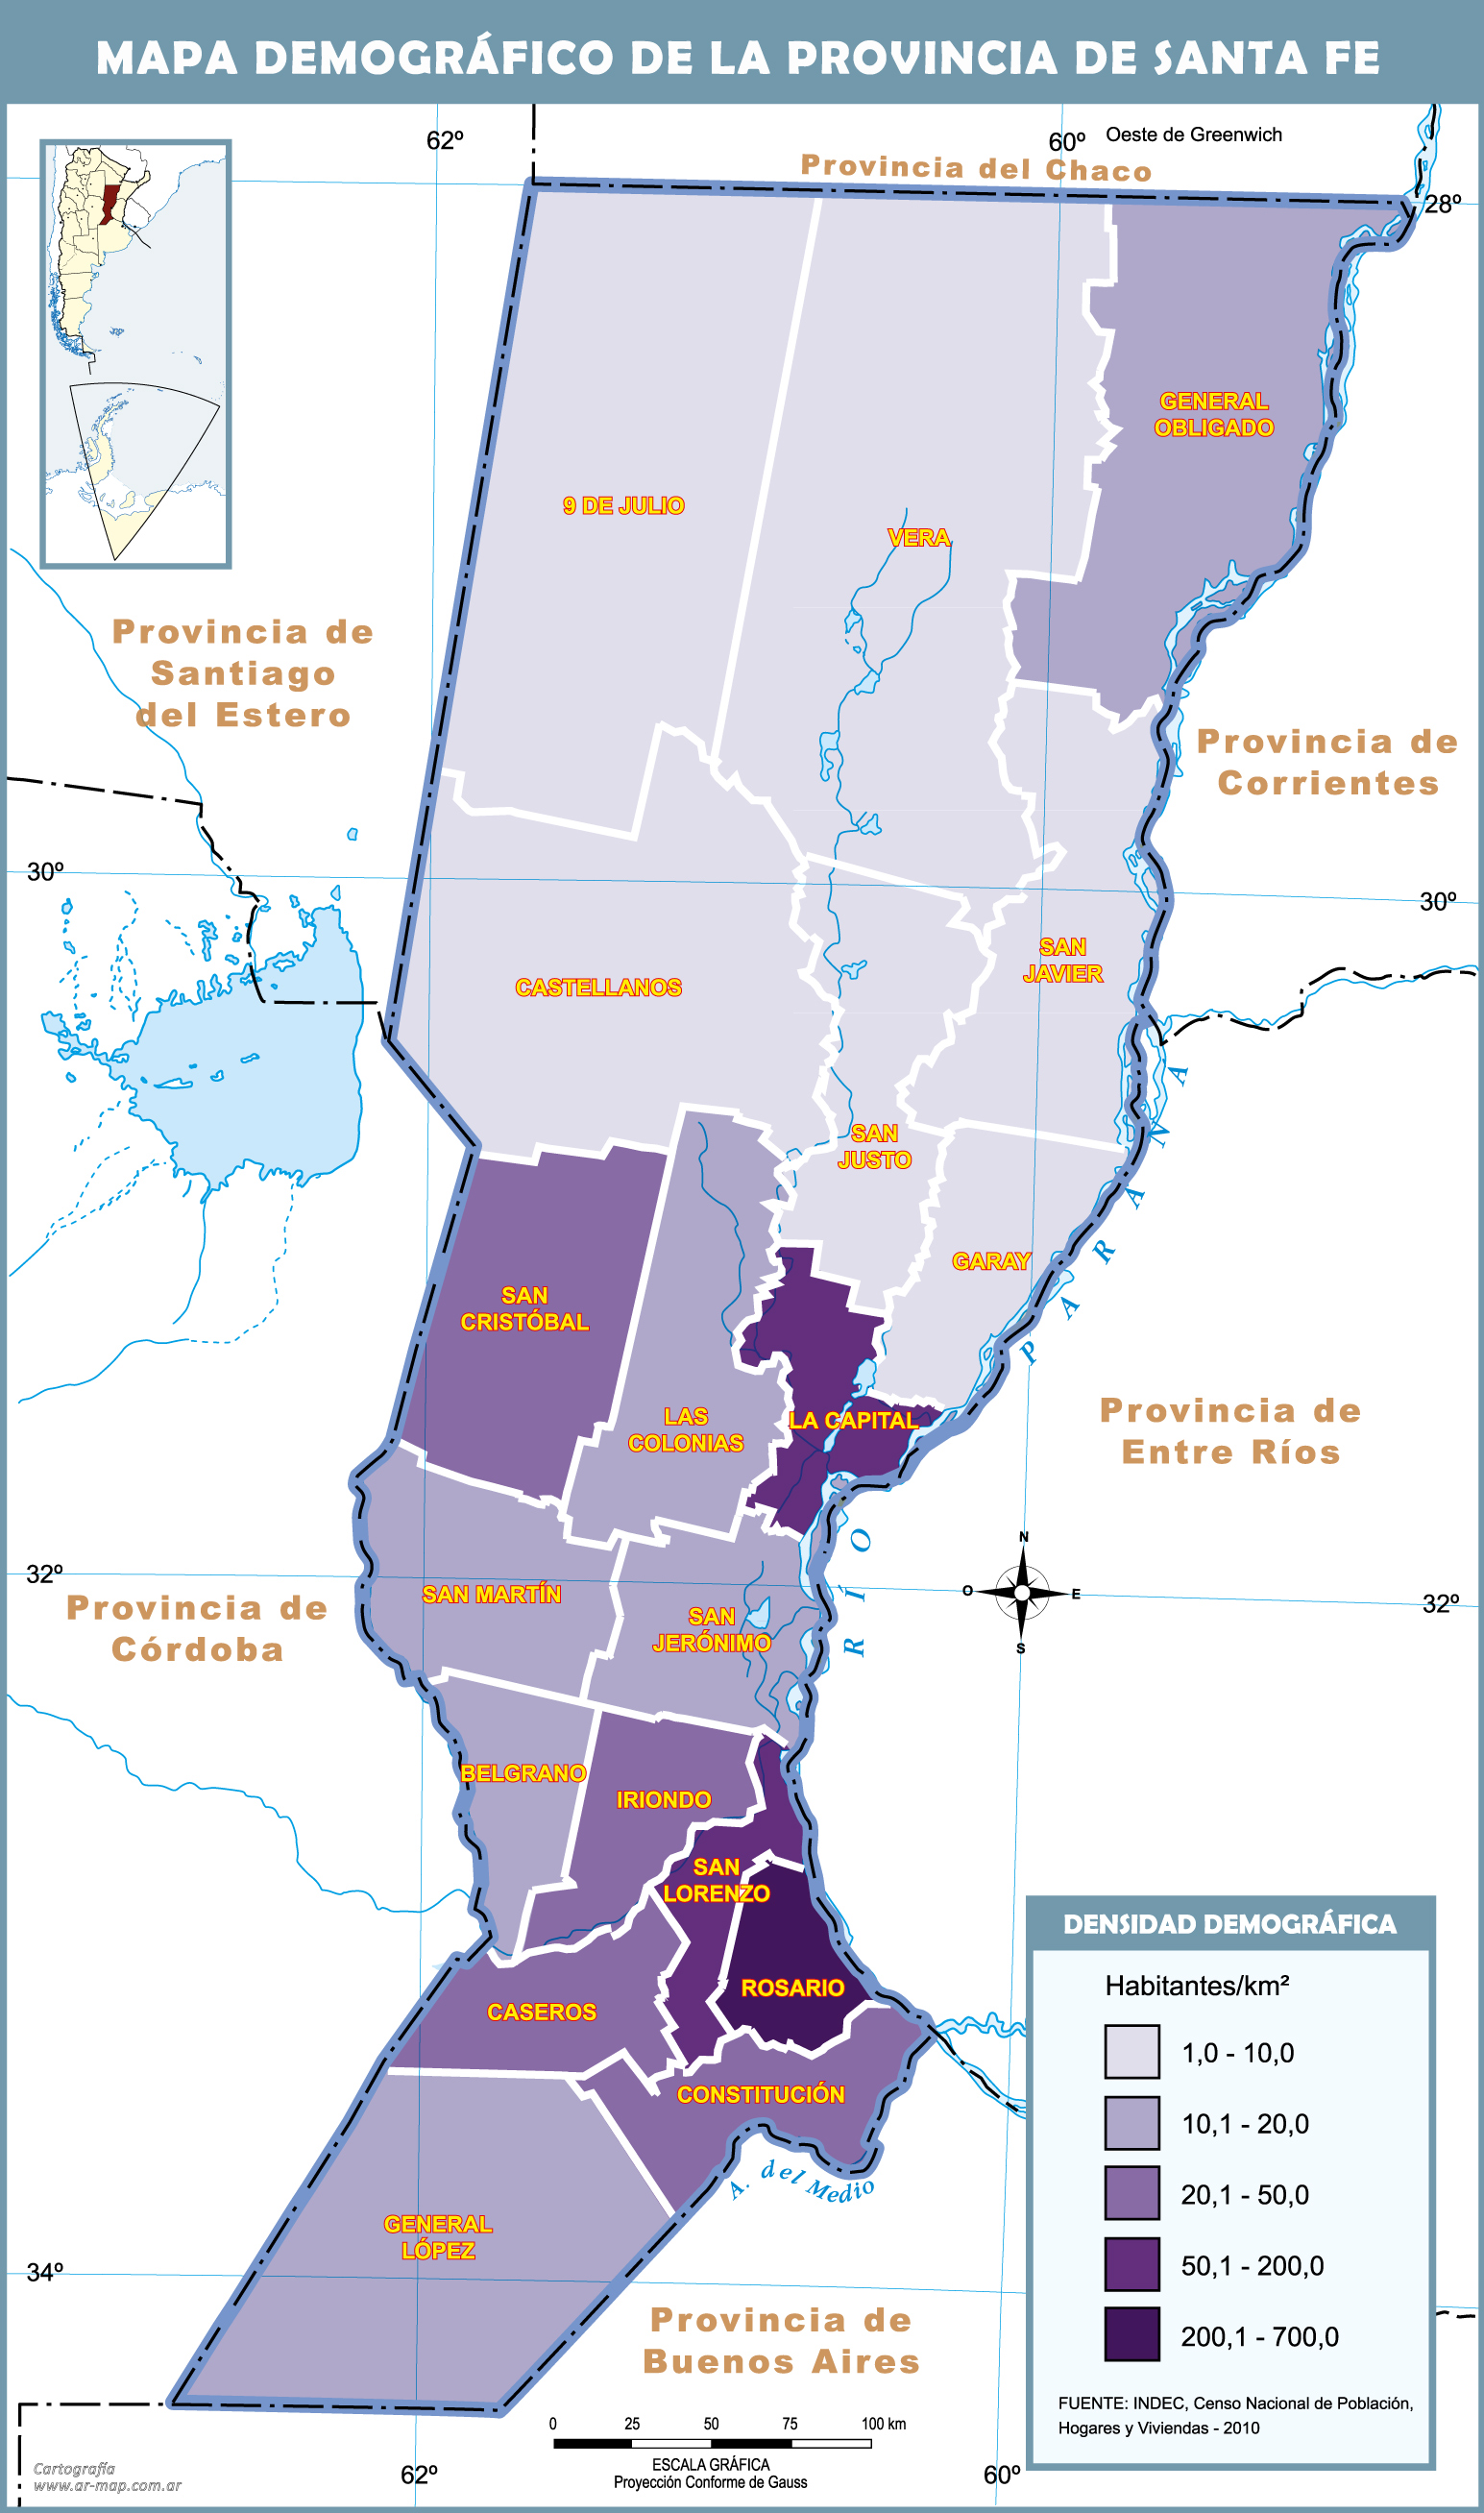 Demographic map of the Province of Santa Fe, Argentina | Gifex